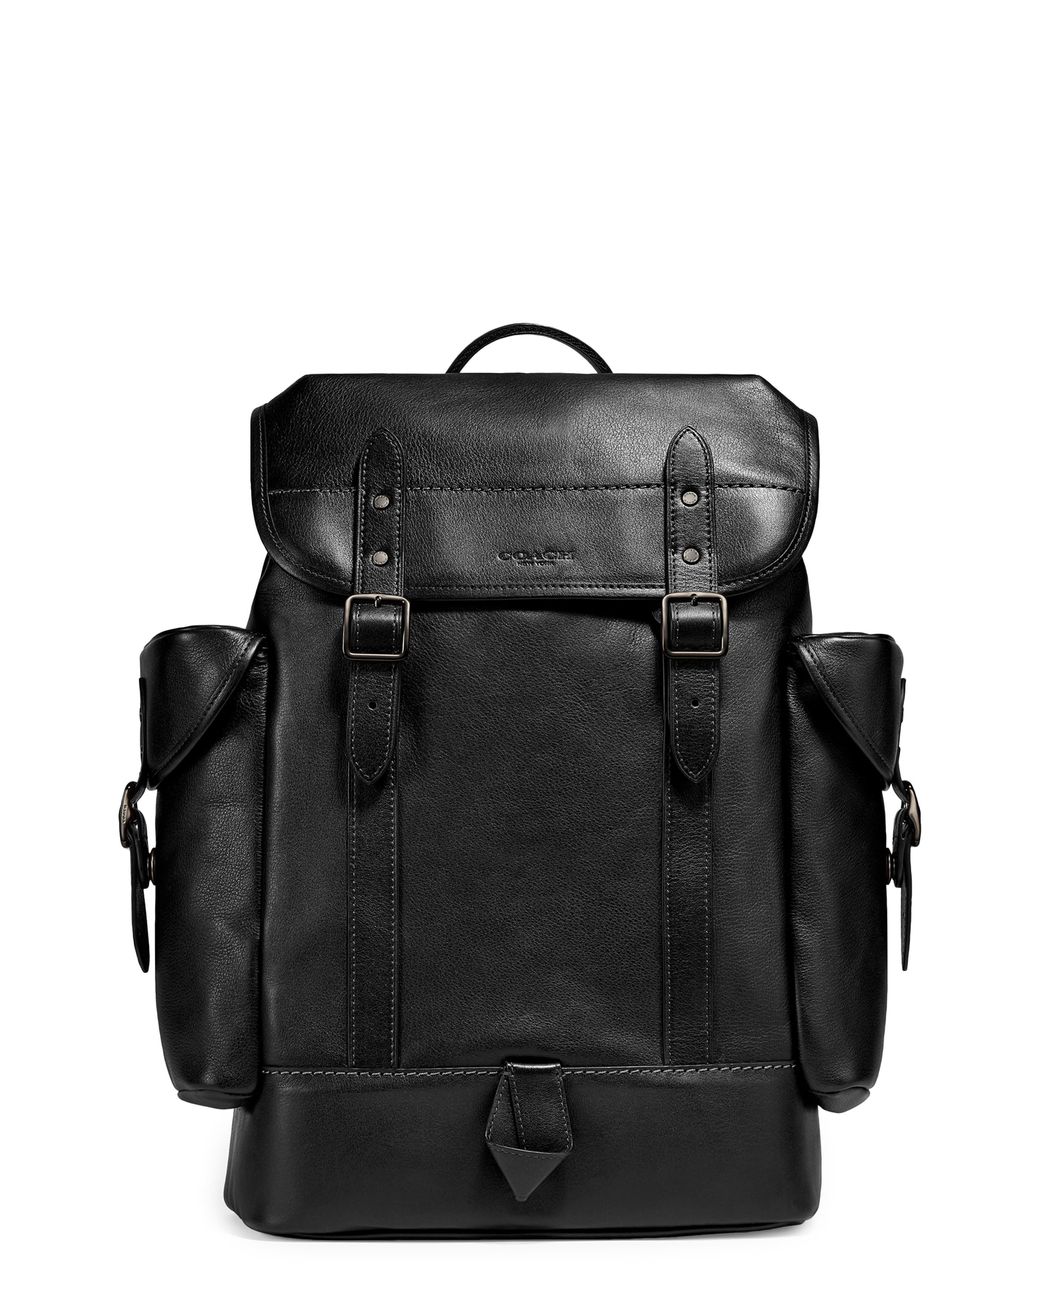 COACH Hitch Sport Calf Leather Backpack in Black for Men - Lyst